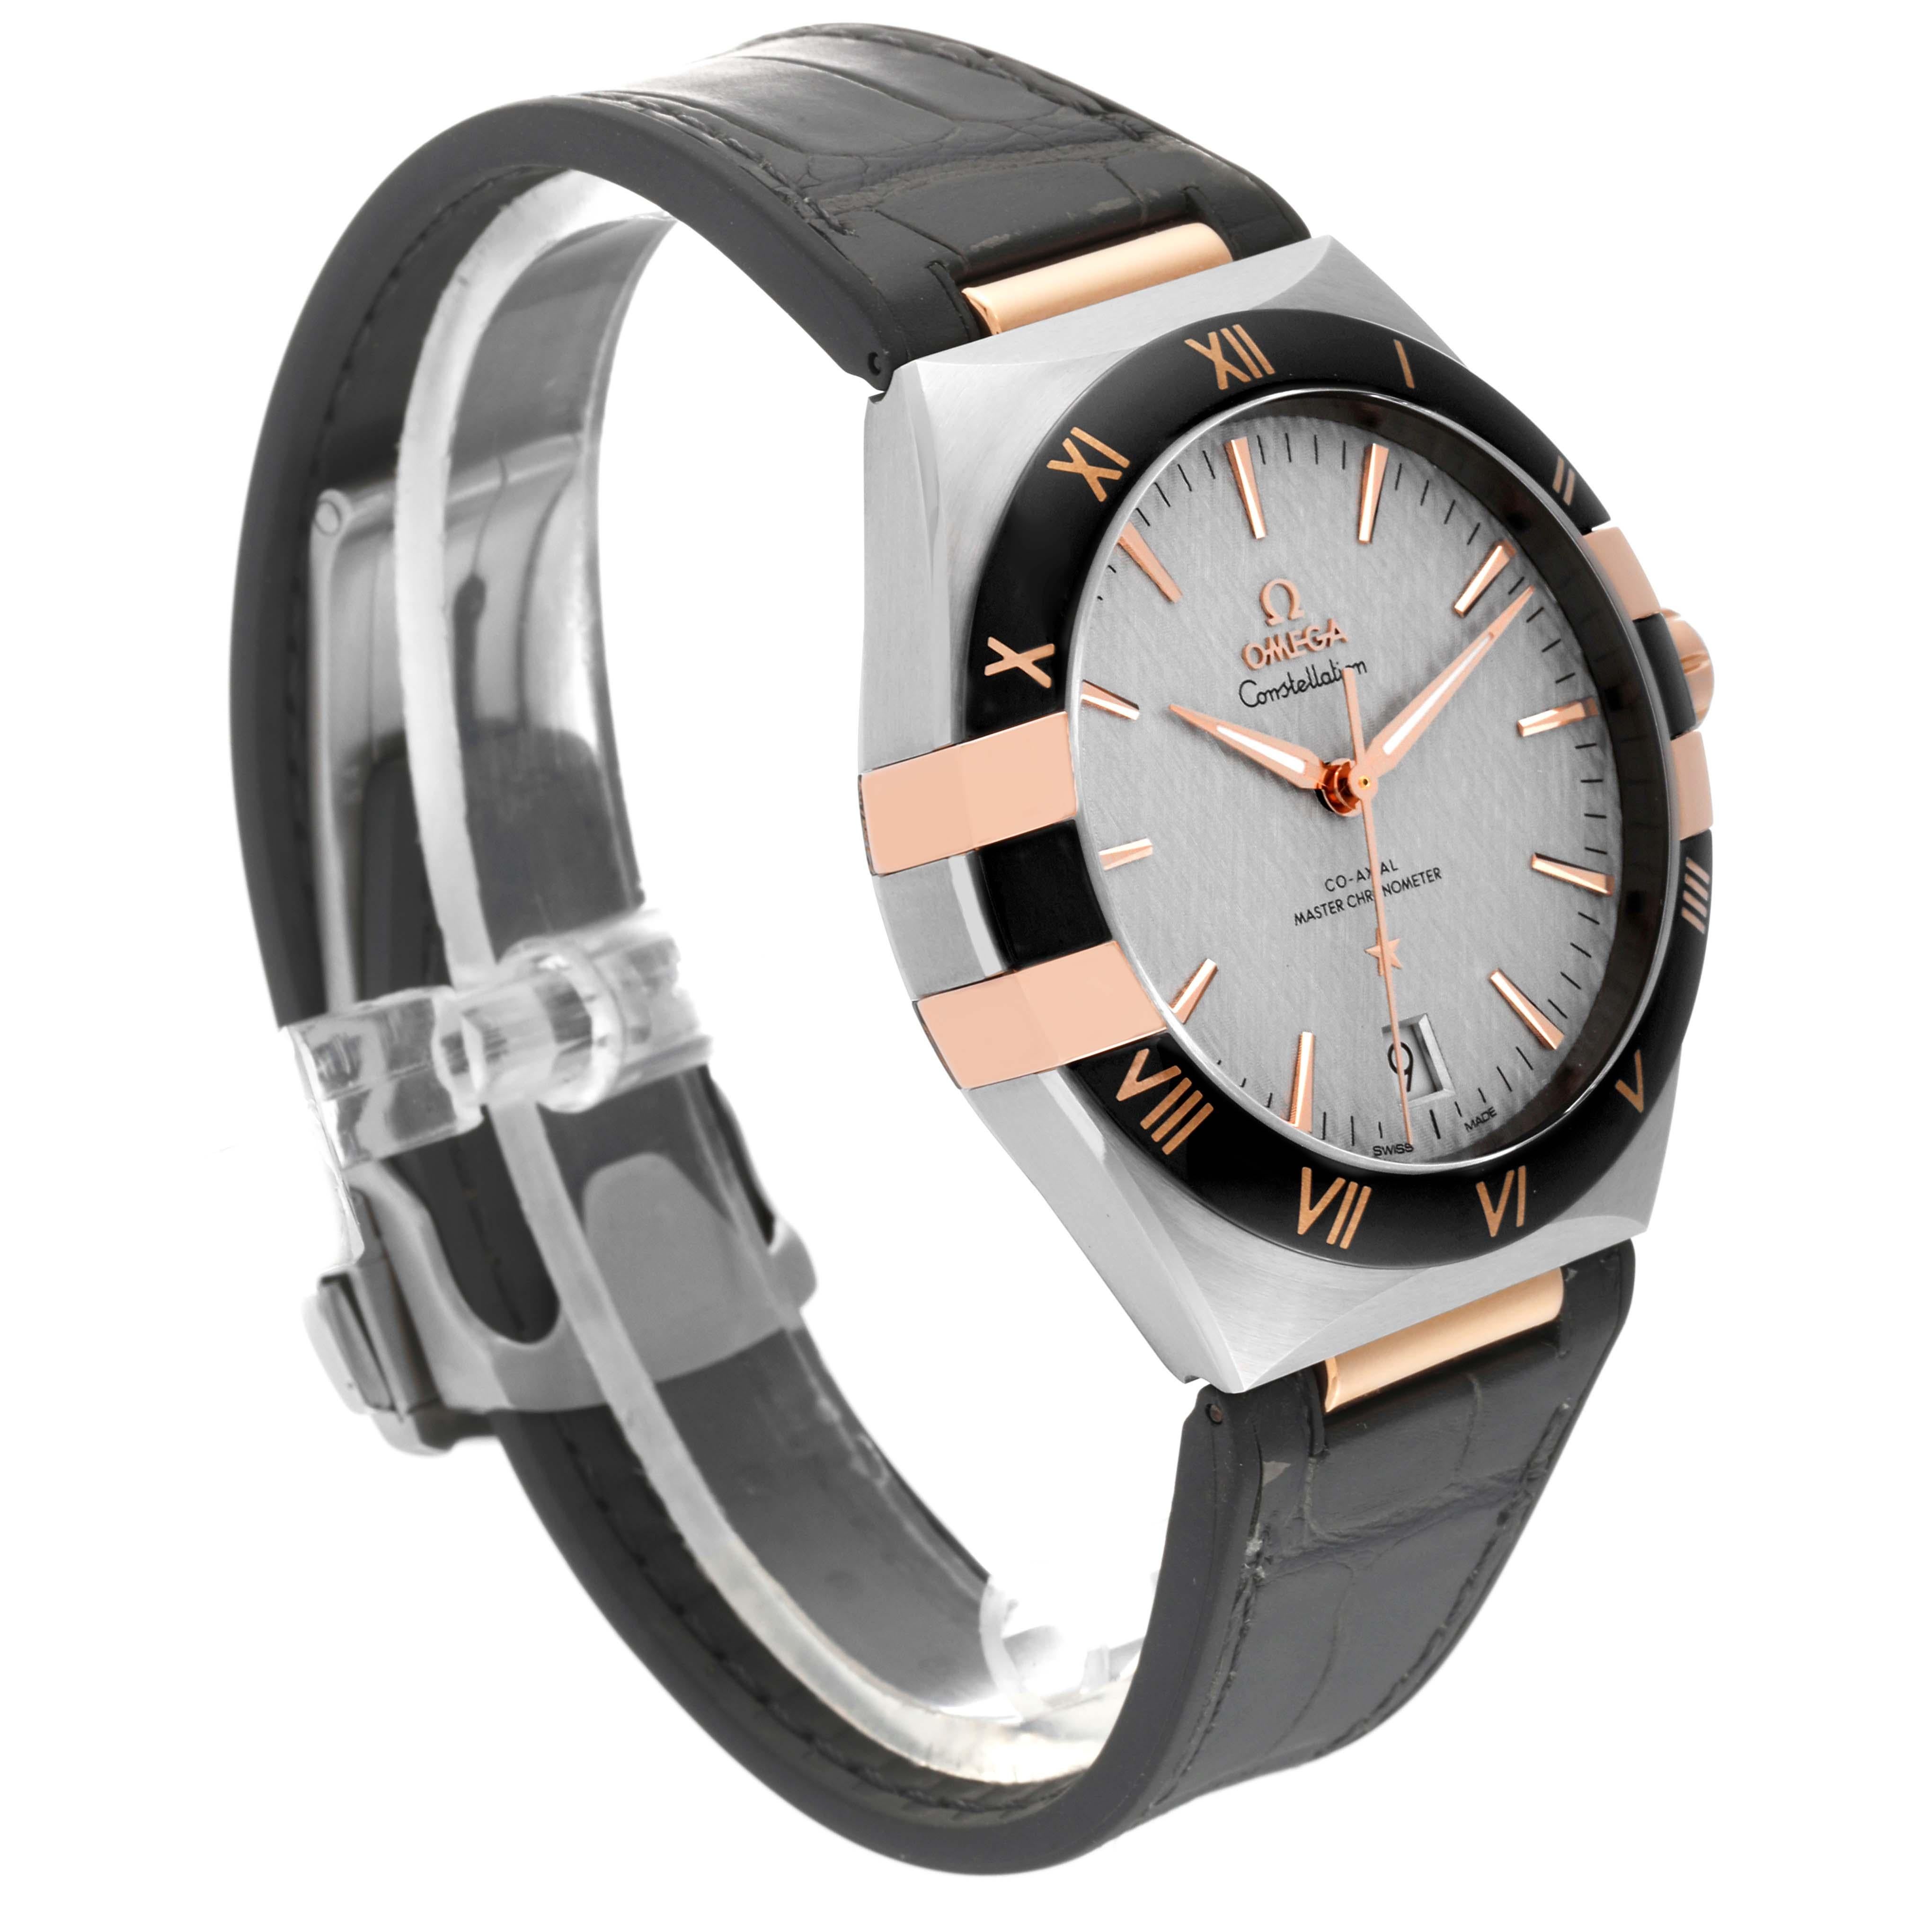 Omega Constellation 41mm Steel Rose Gold Mens Watch 131.23.41.21.06.001 Unworn. Automatic self-winding Co-Axial Escapement movement. Stainless steel and 18K rose gold case 41.0 mm in diameter. Omega logo on an 18K rose gold crown. Transparent